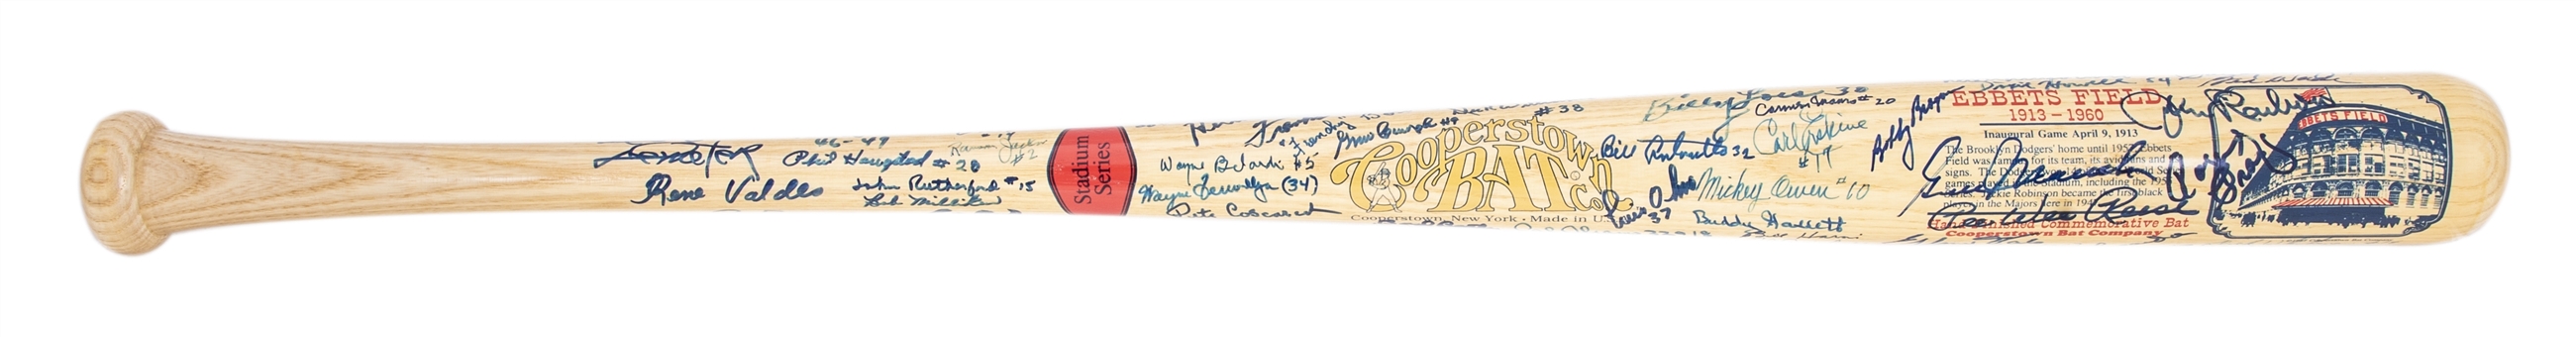 Ebbets Field Commemorative Cooperstown Multi-Signed Bat Signed by 50+ Including Snider, Koufax, Reese & Lasorda (Beckett)